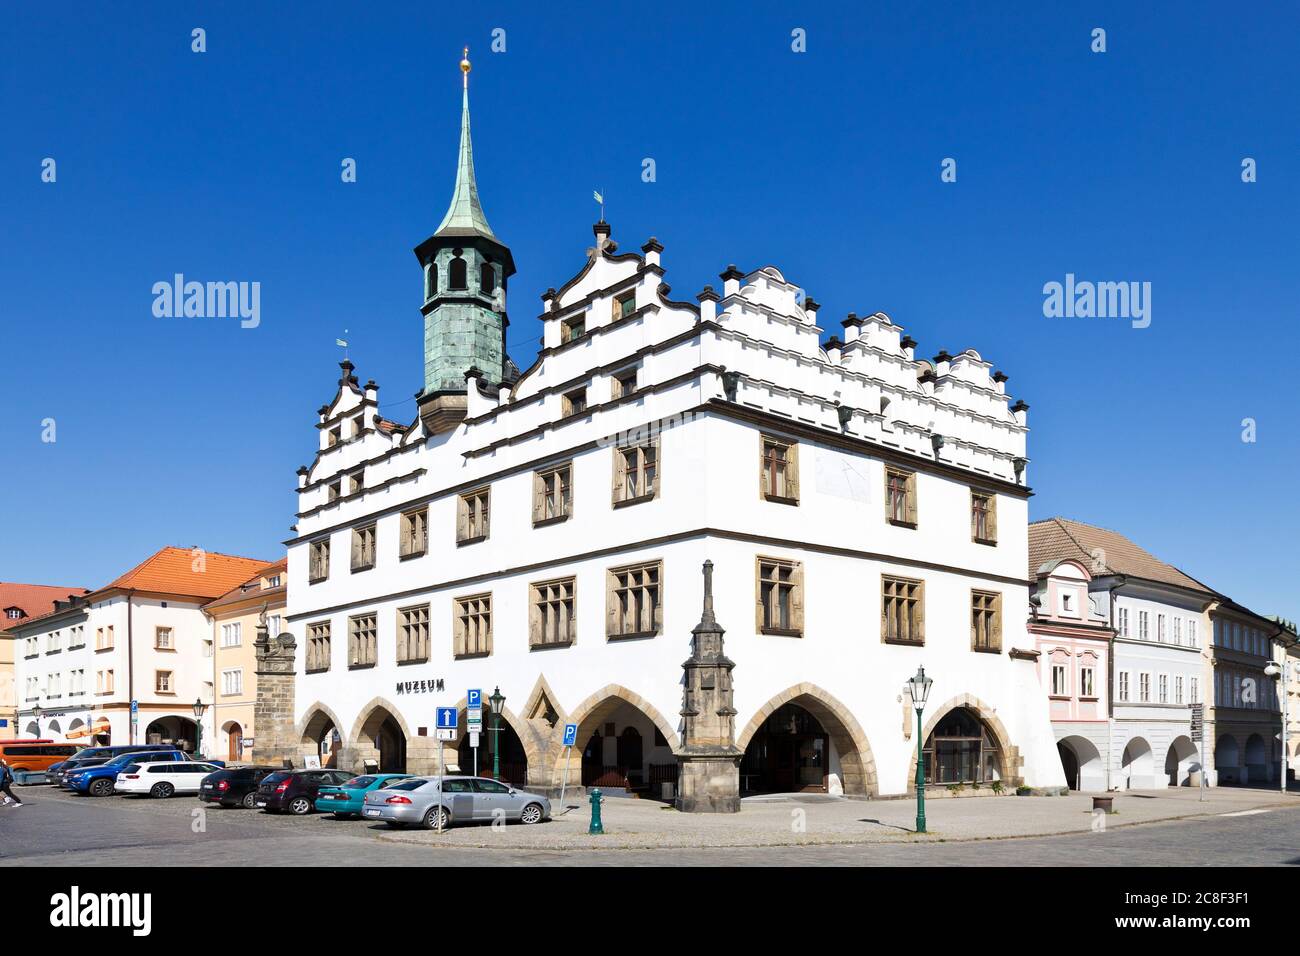 Mirove Namesti High Resolution Stock Photography and Images - Alamy